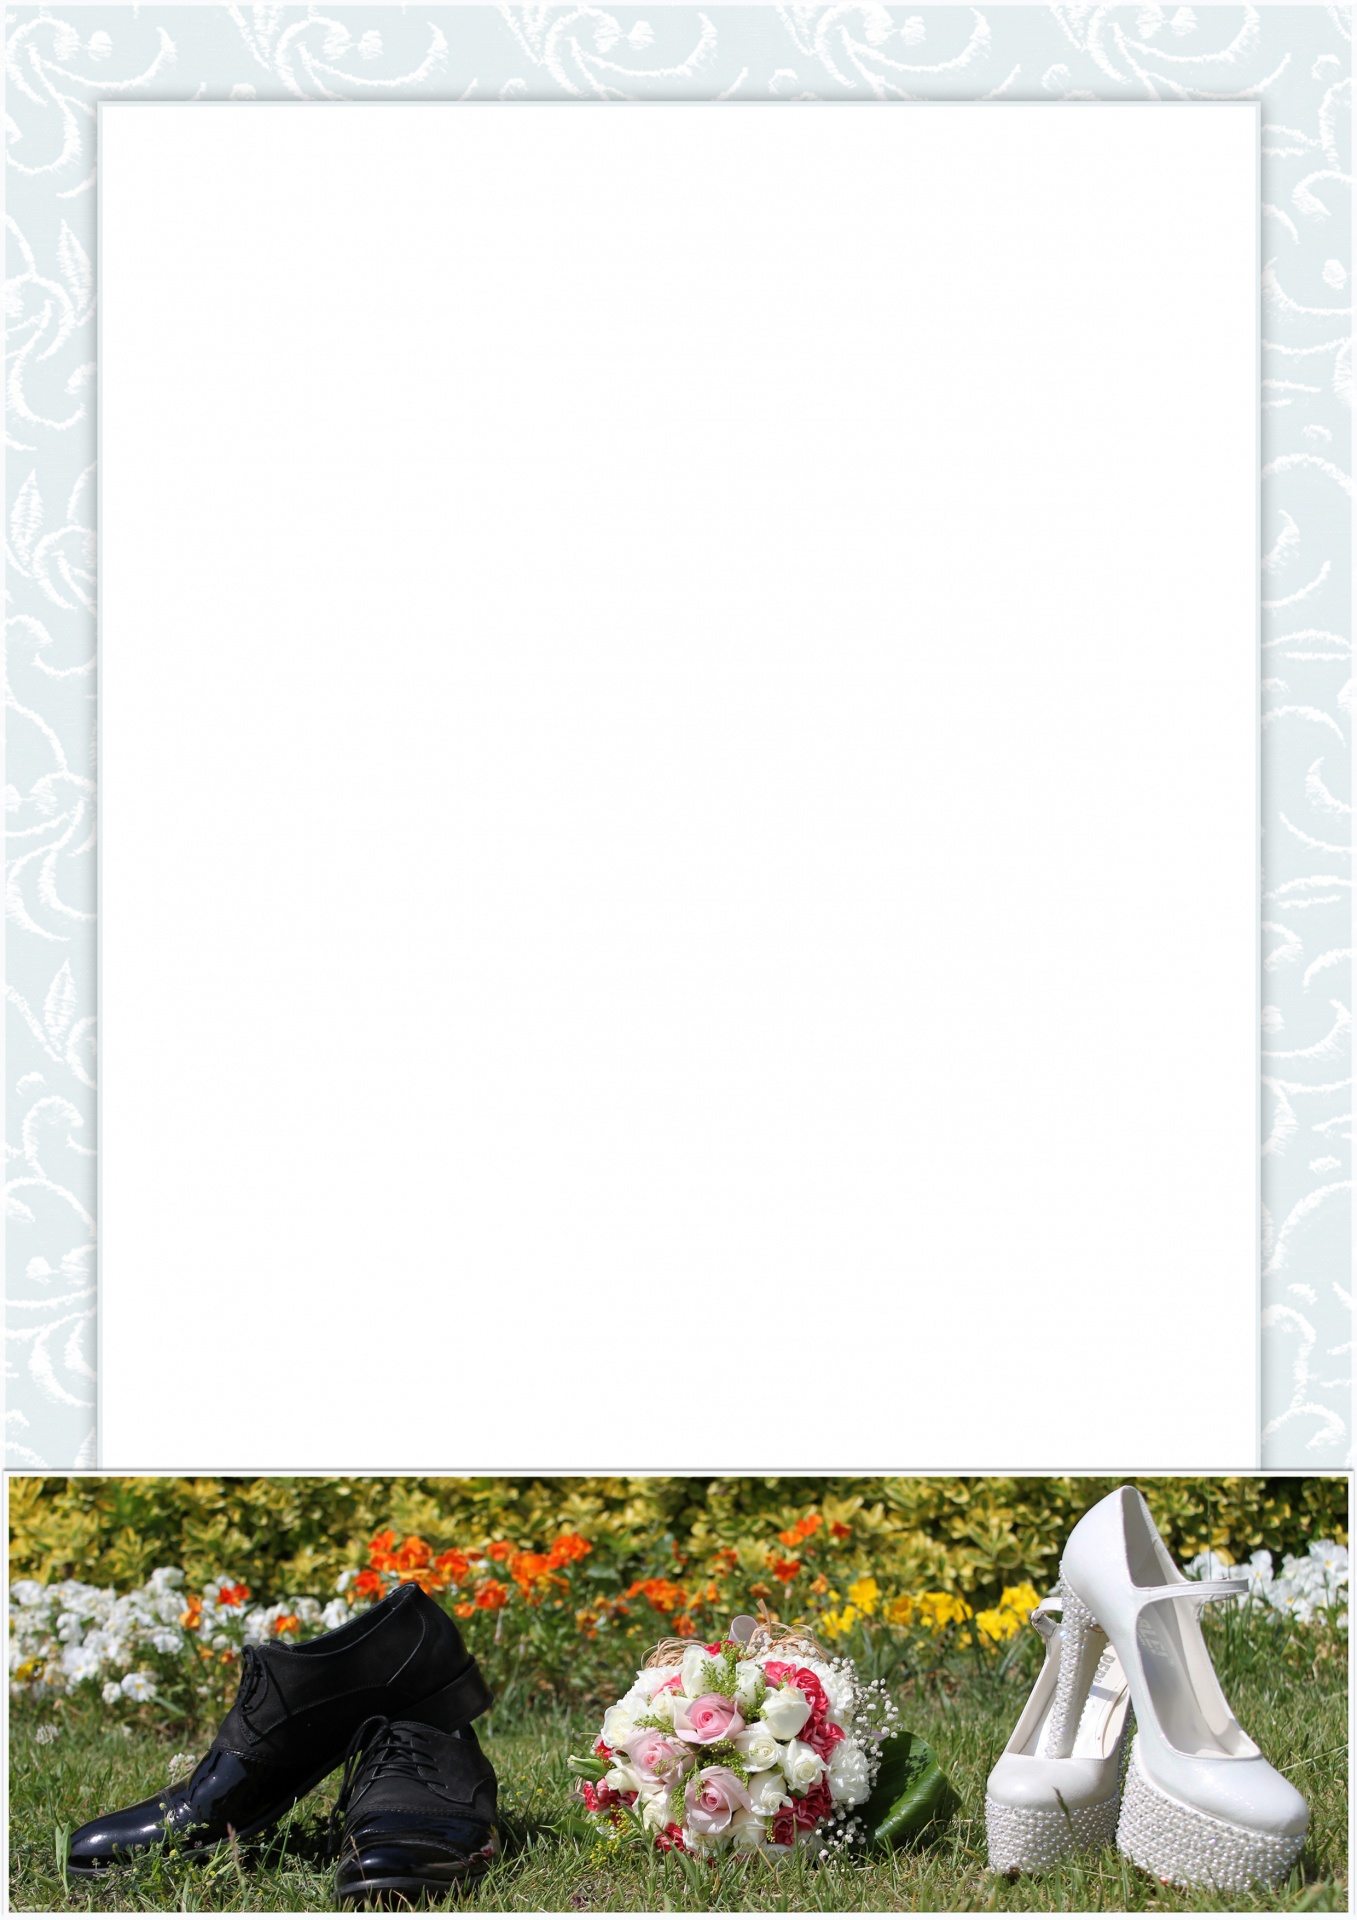 greeting card frame for text frame free photo